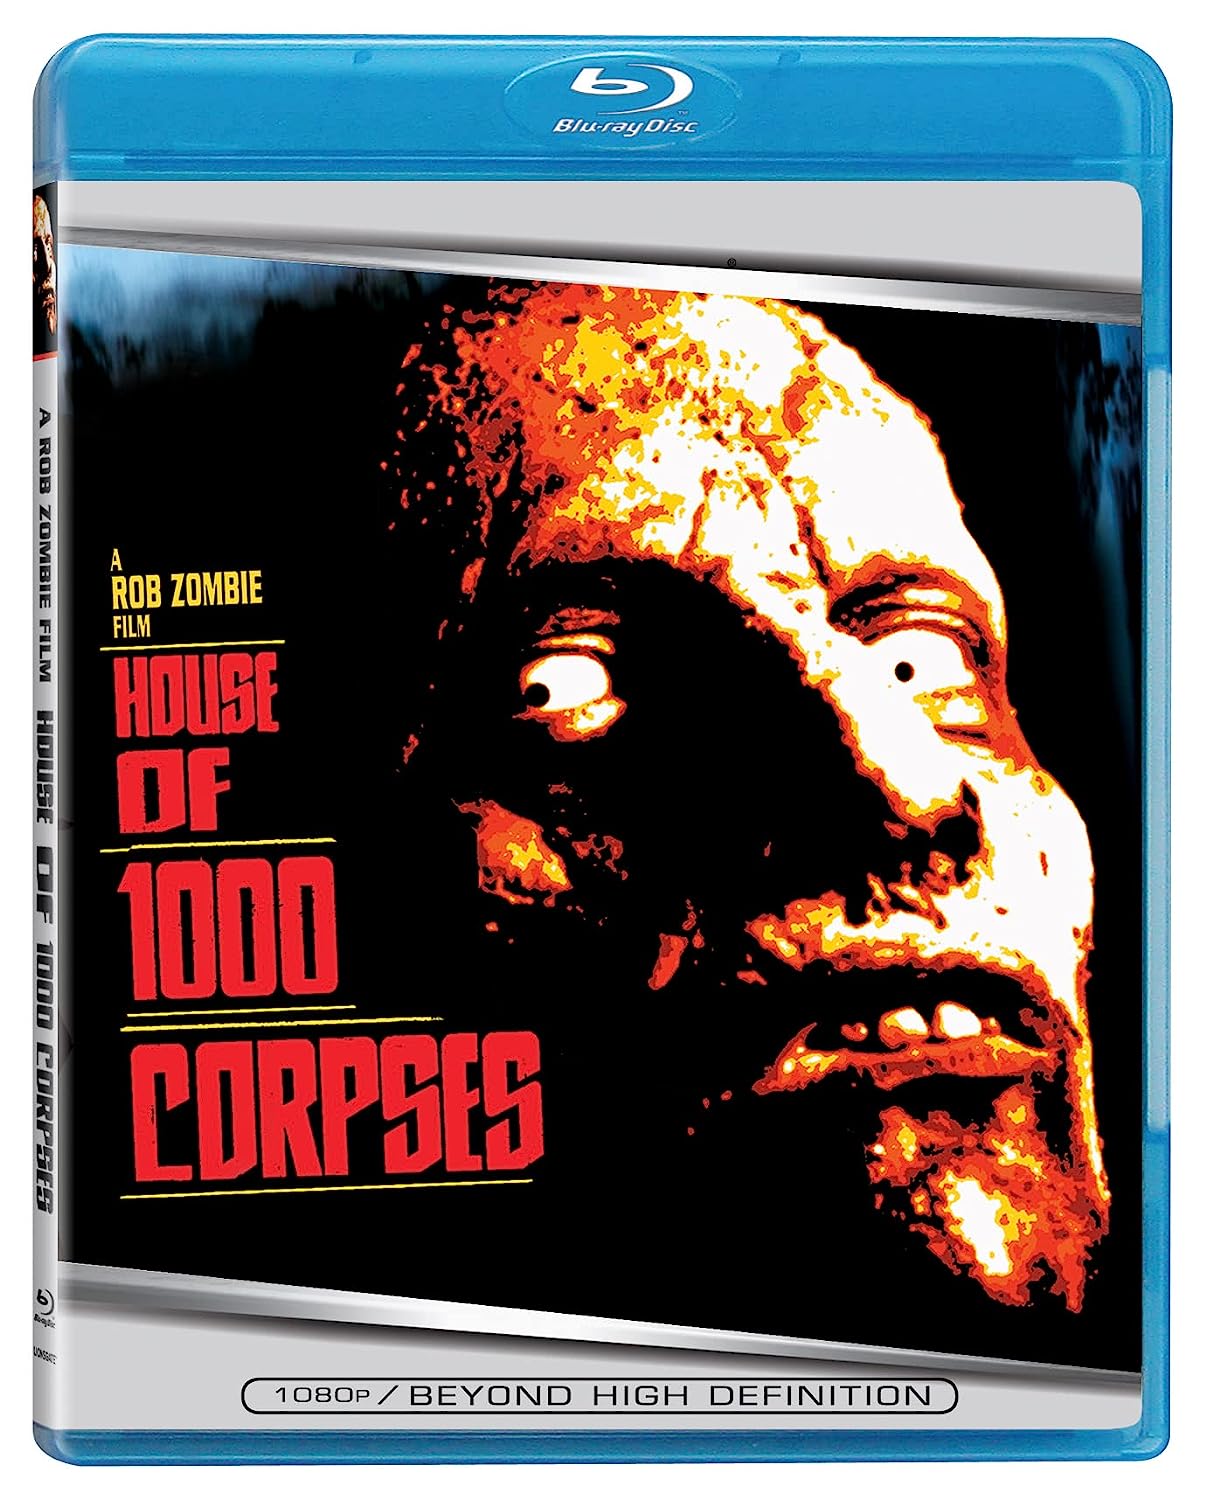 House Of 1000 Corpses - Darkside Records